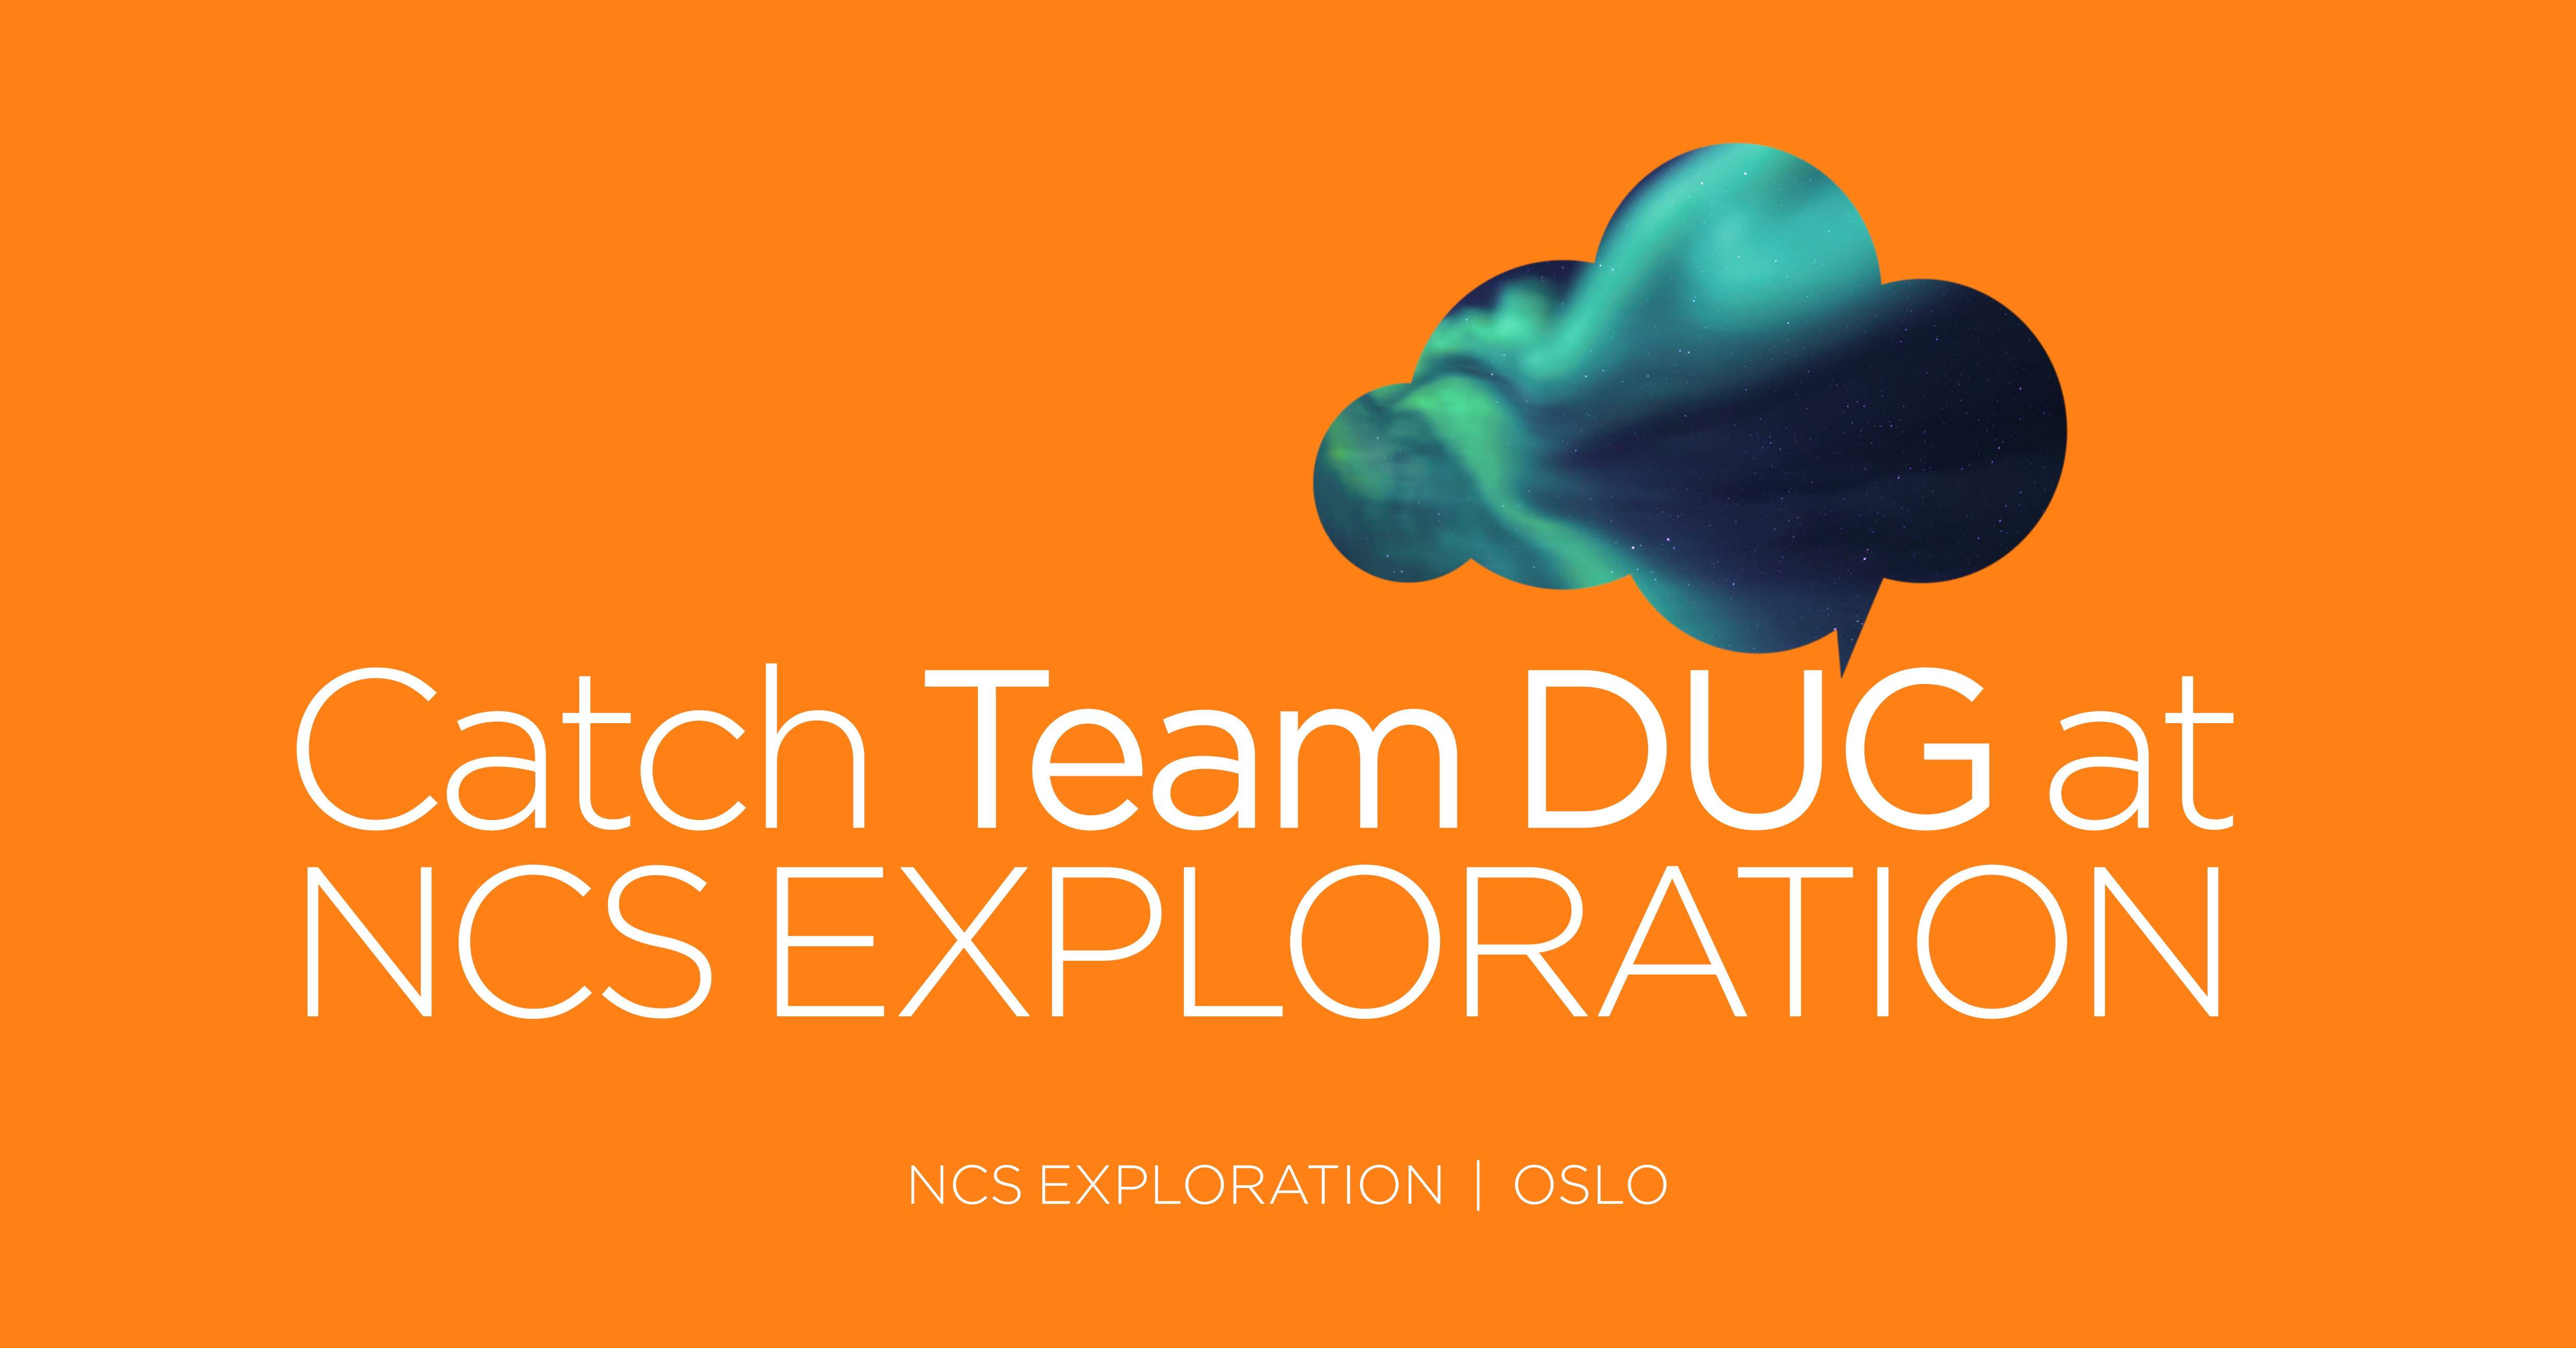 Catch Team DUG this week at NCS Exploration, Oslo